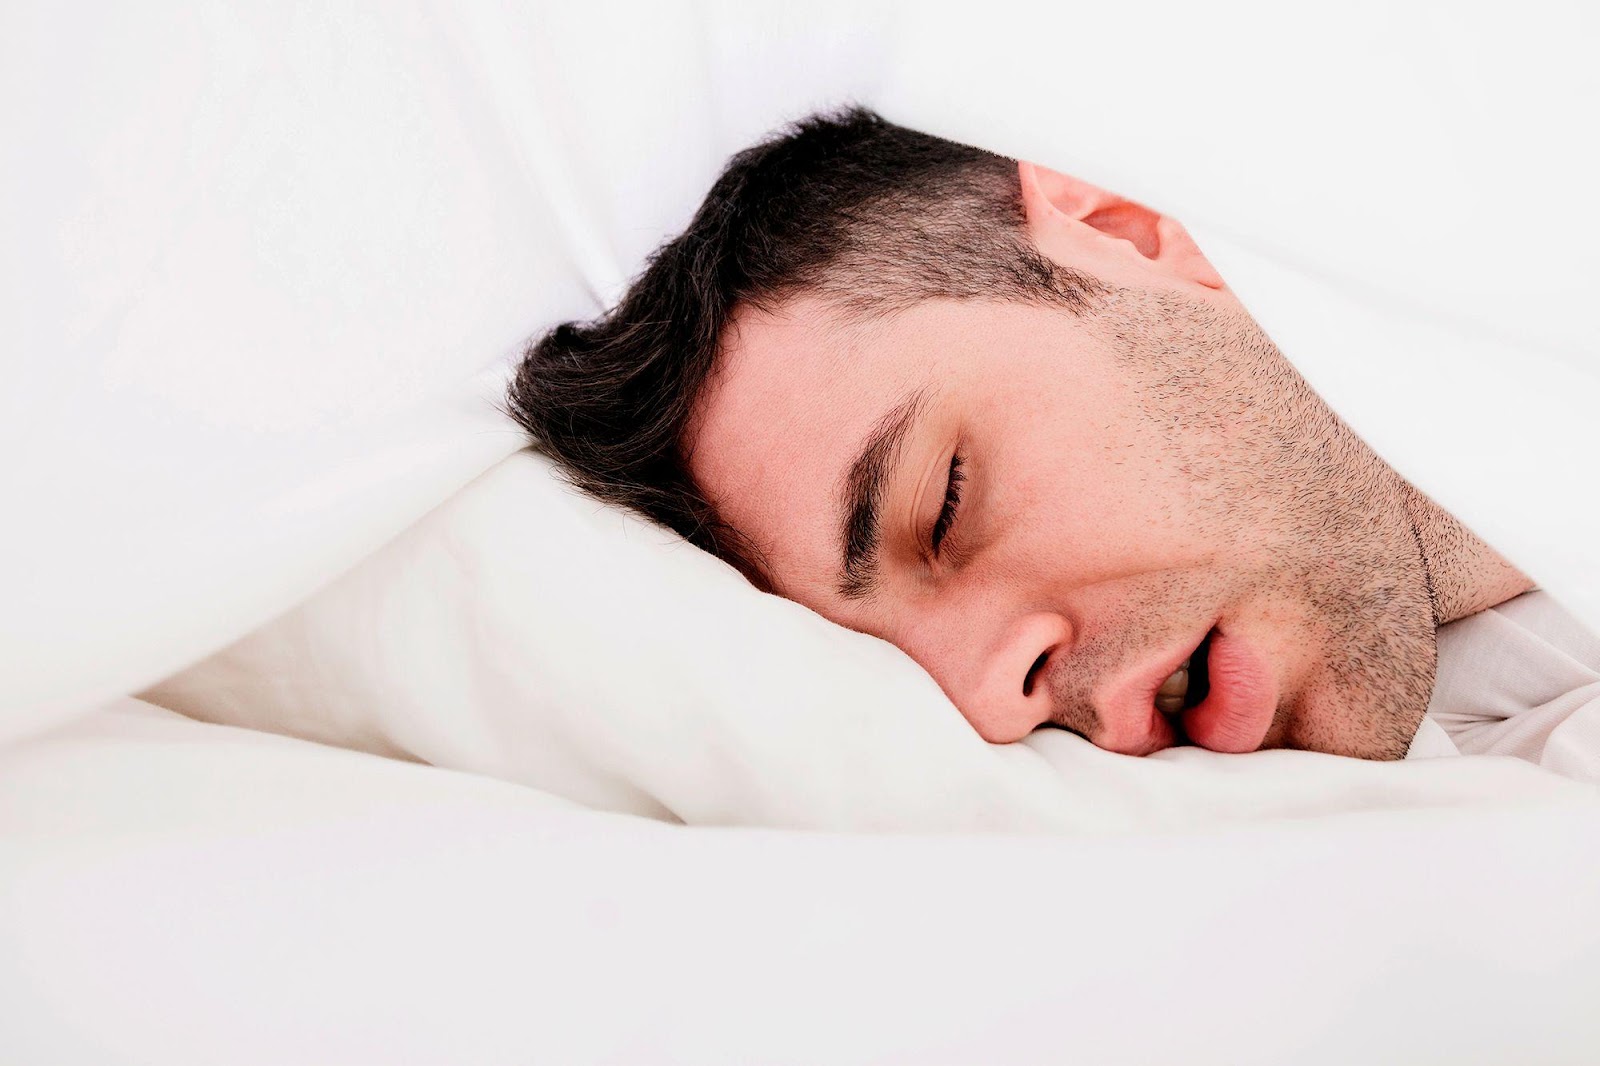 Sleeping too much can cause an early death